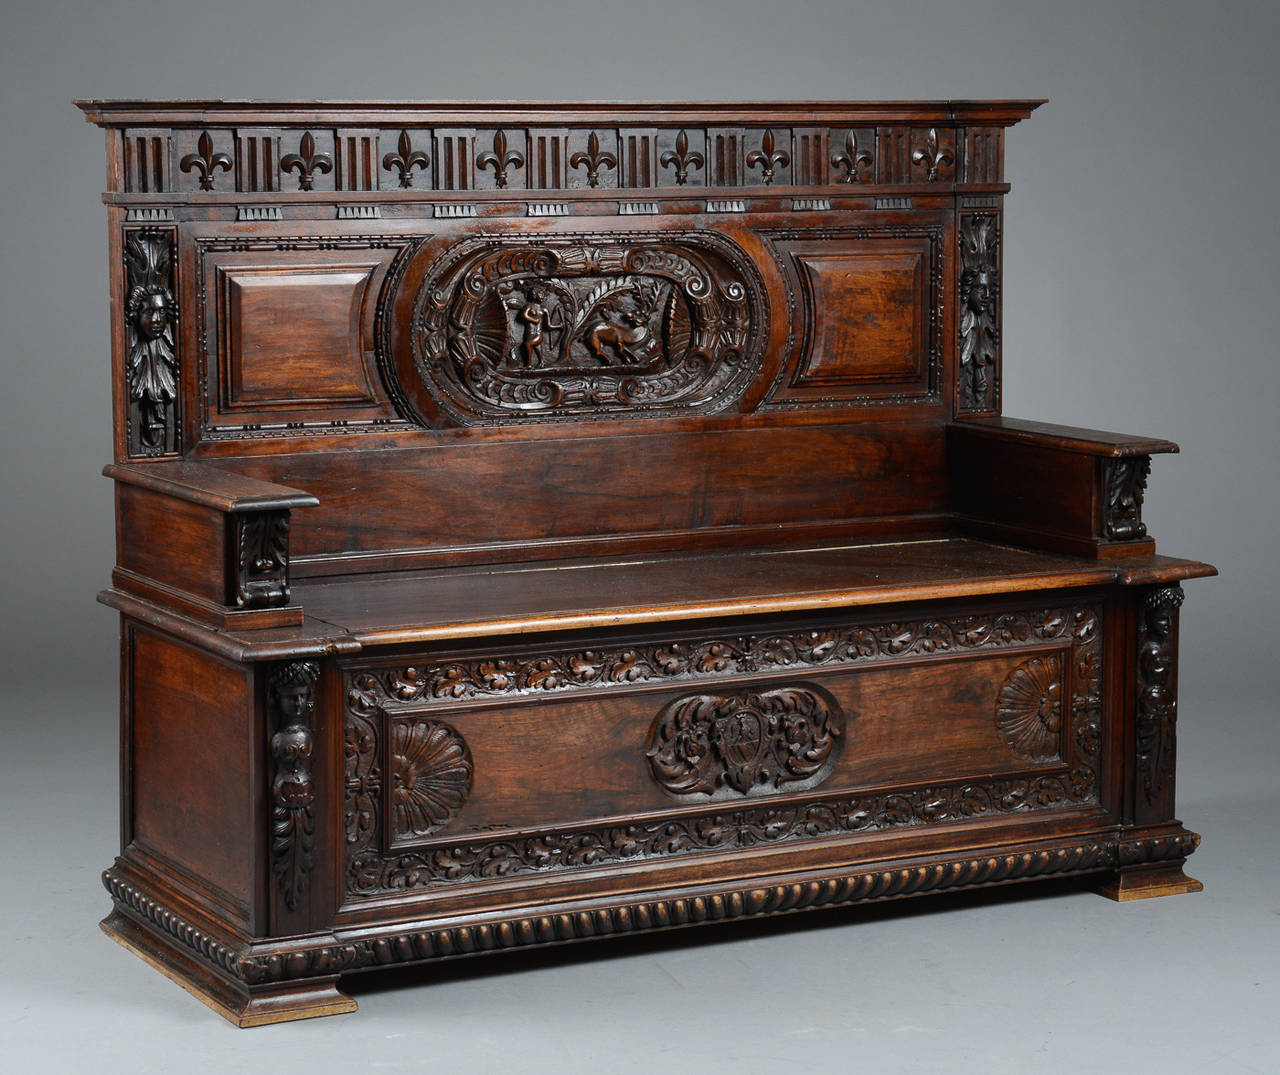 This highly ornate and carved walnut bench is from late 17th century Italy. The carved elements include the back with recessed landscape of Hermes and stag. The sides and lower front include elaborate carving and faces while fleur de lis crown the